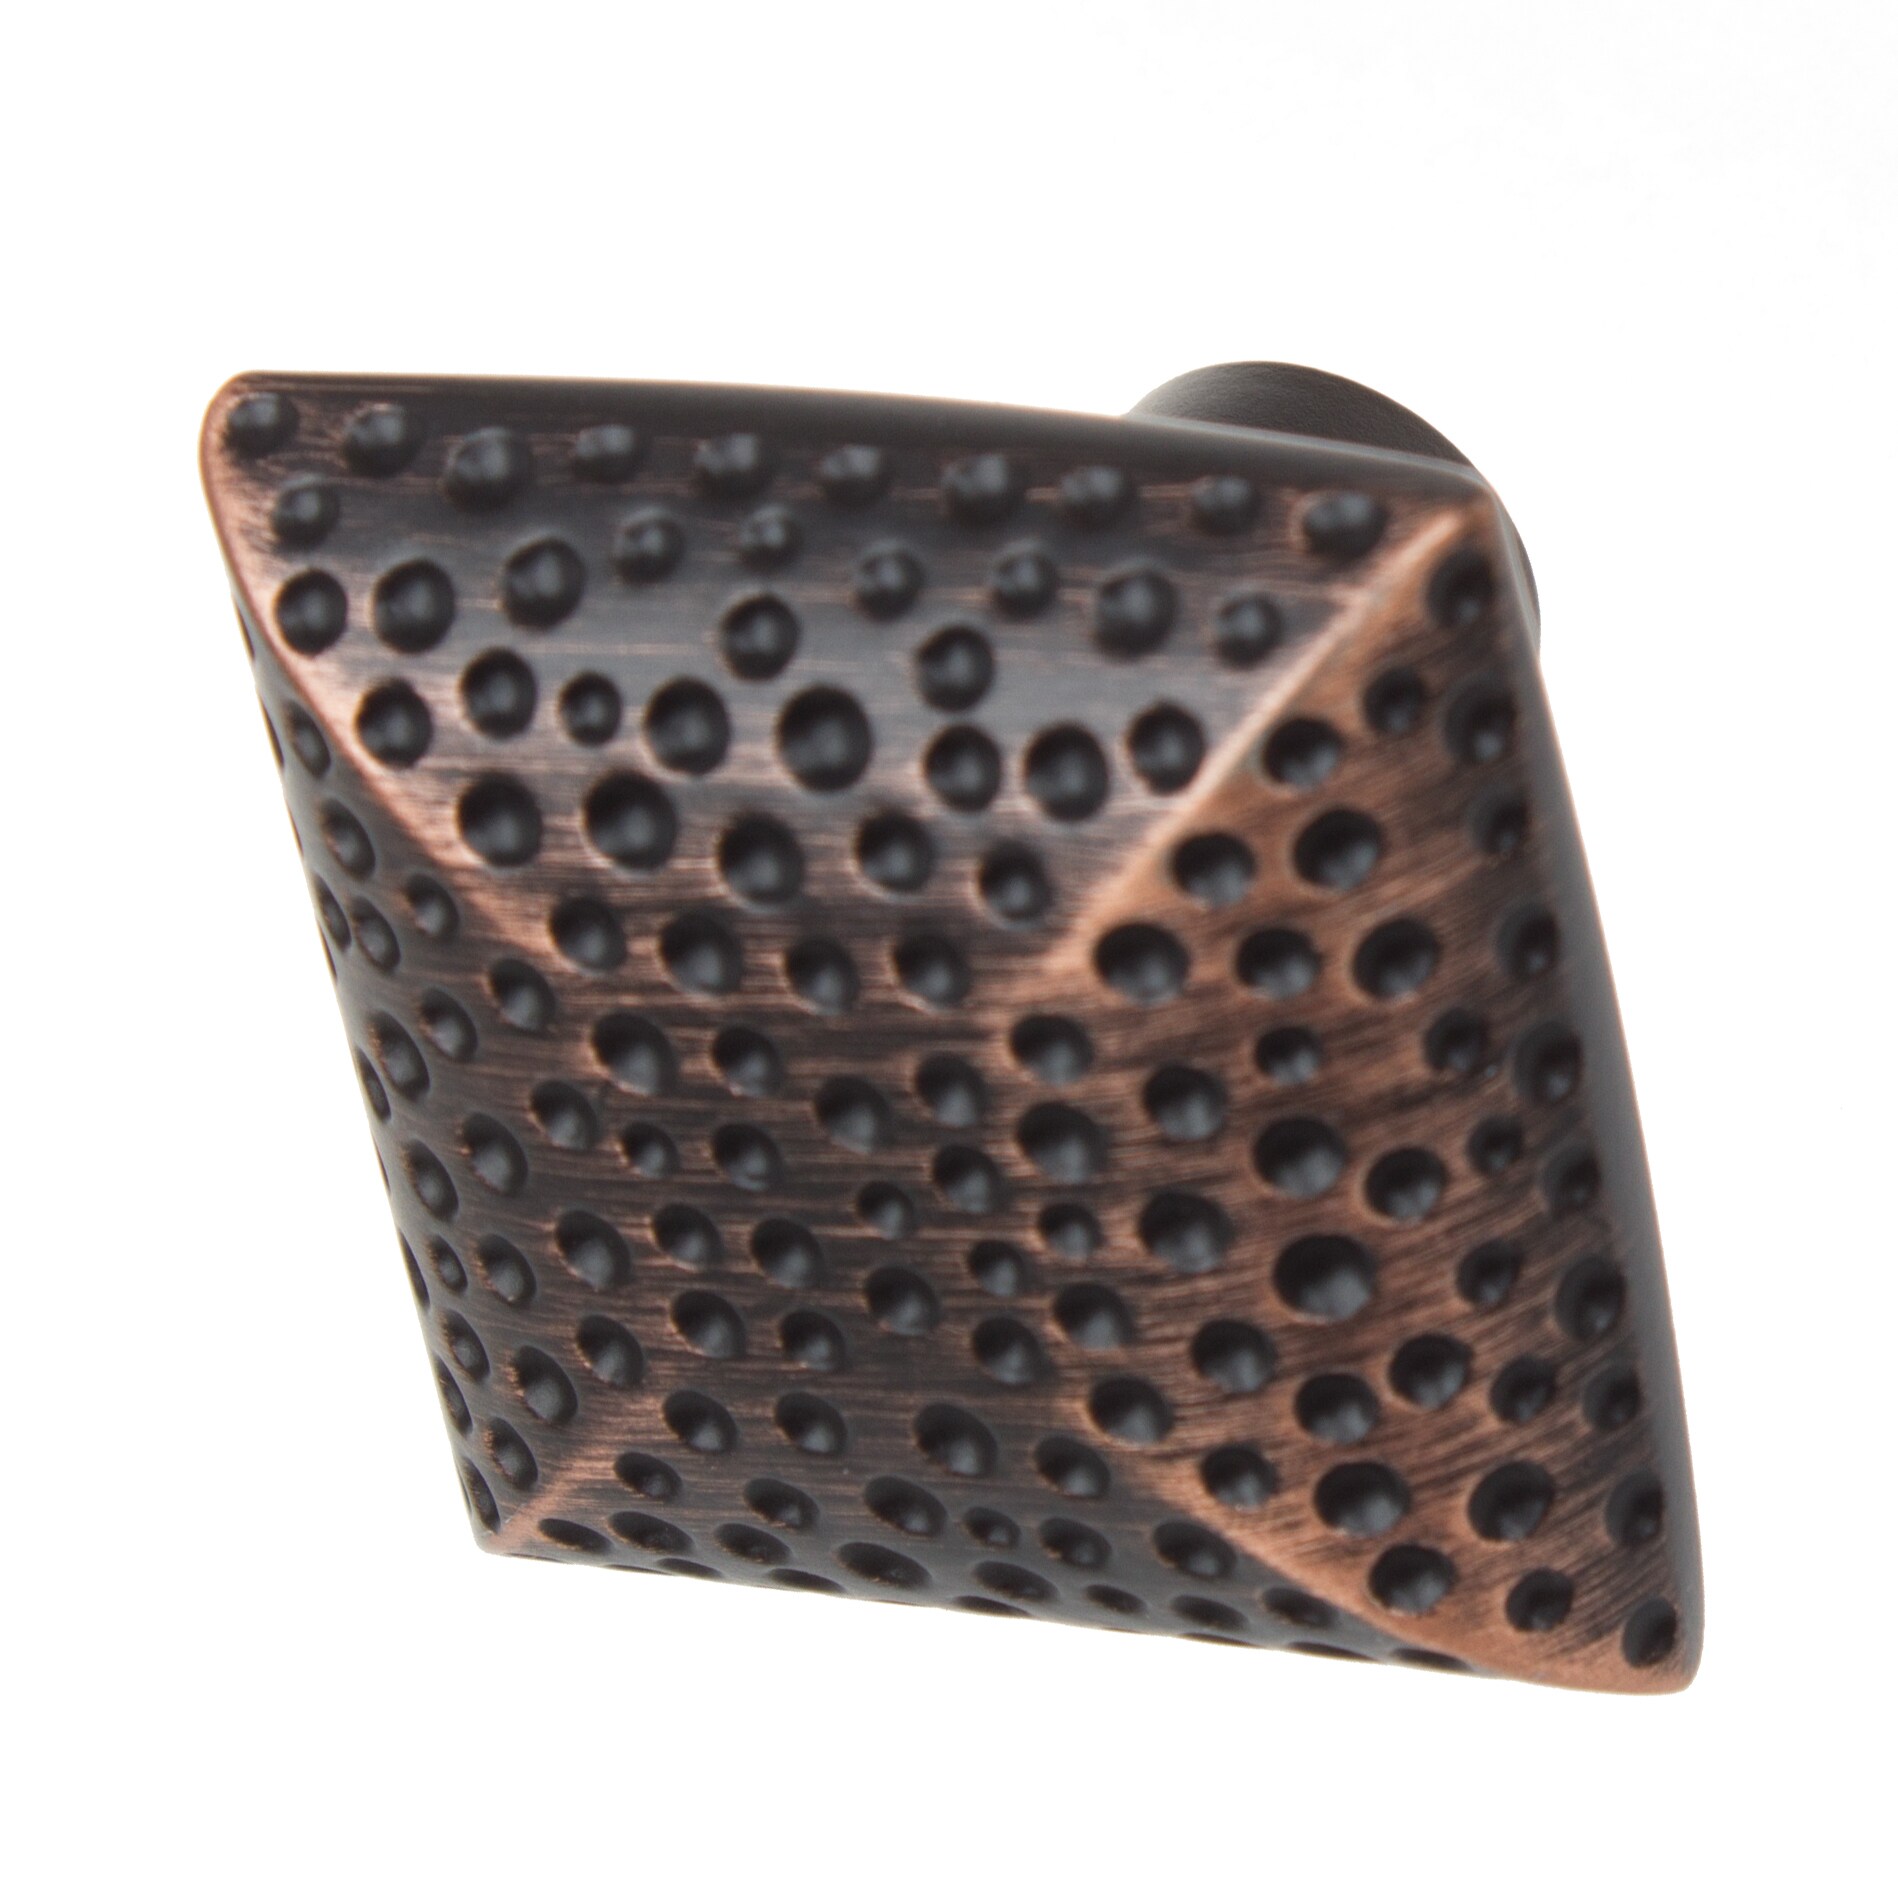 GlideRite 1-1/4 in. Dotted Hammered Transitional Square Cabinet Knobs, Oil Rubbed Bronze, Pack of 10 - image 4 of 5